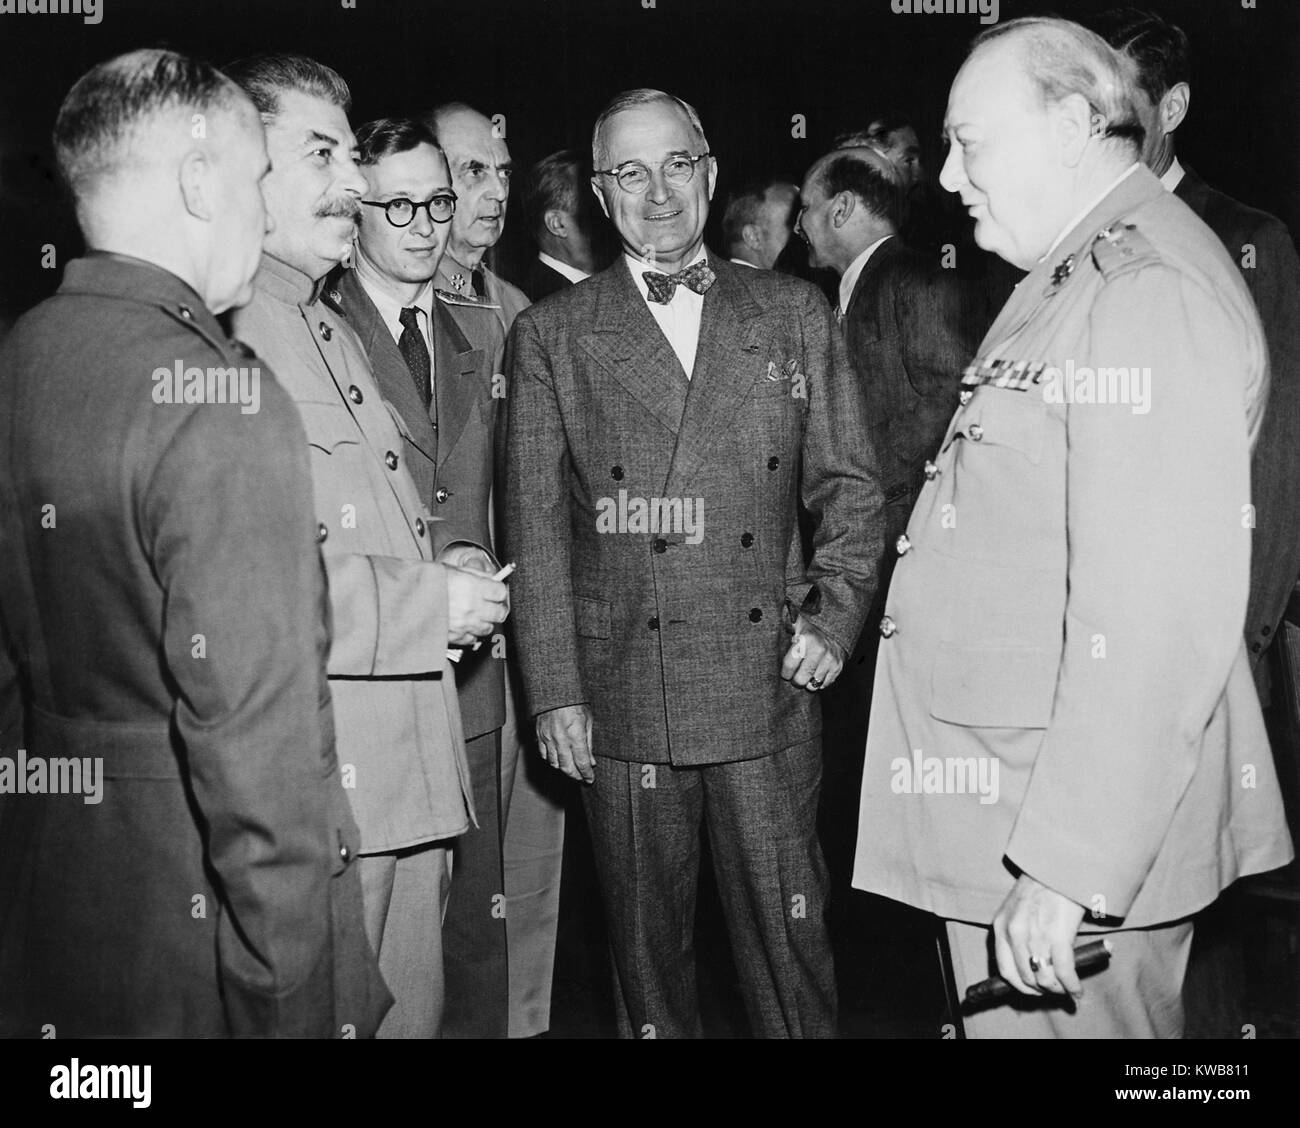 Allied leaders at the Potsdam Conference, July 17- Aug. 2, 1945. L-R: George Marshall, Joseph Stalin, unidentified, William Leahy, Harry Truman, Winston Churchill. World War 2. (BSLOC 2014 8 202) Stock Photo